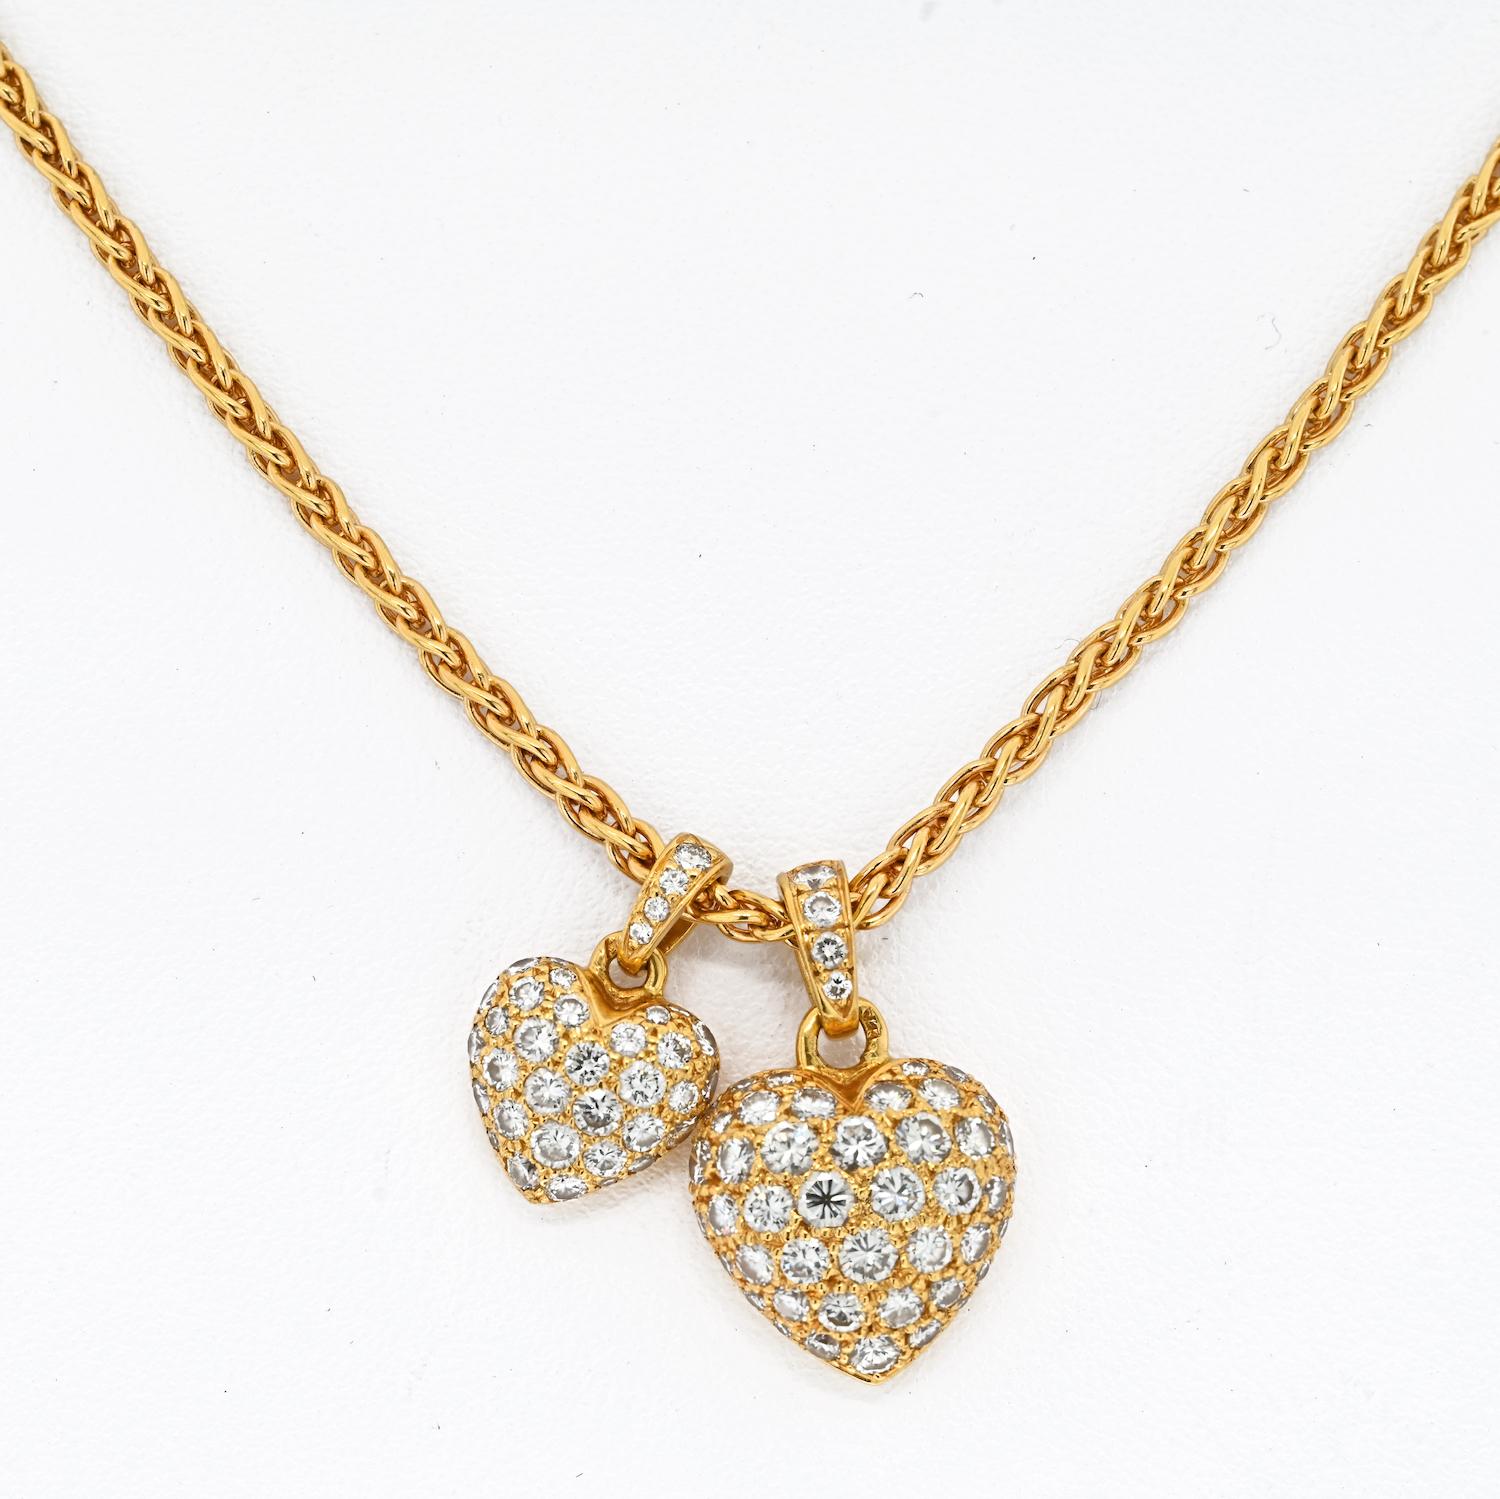 Modern Cartier 18K Yellow Gold Puffy Hearts Pave Round Diamond Pendant Necklace